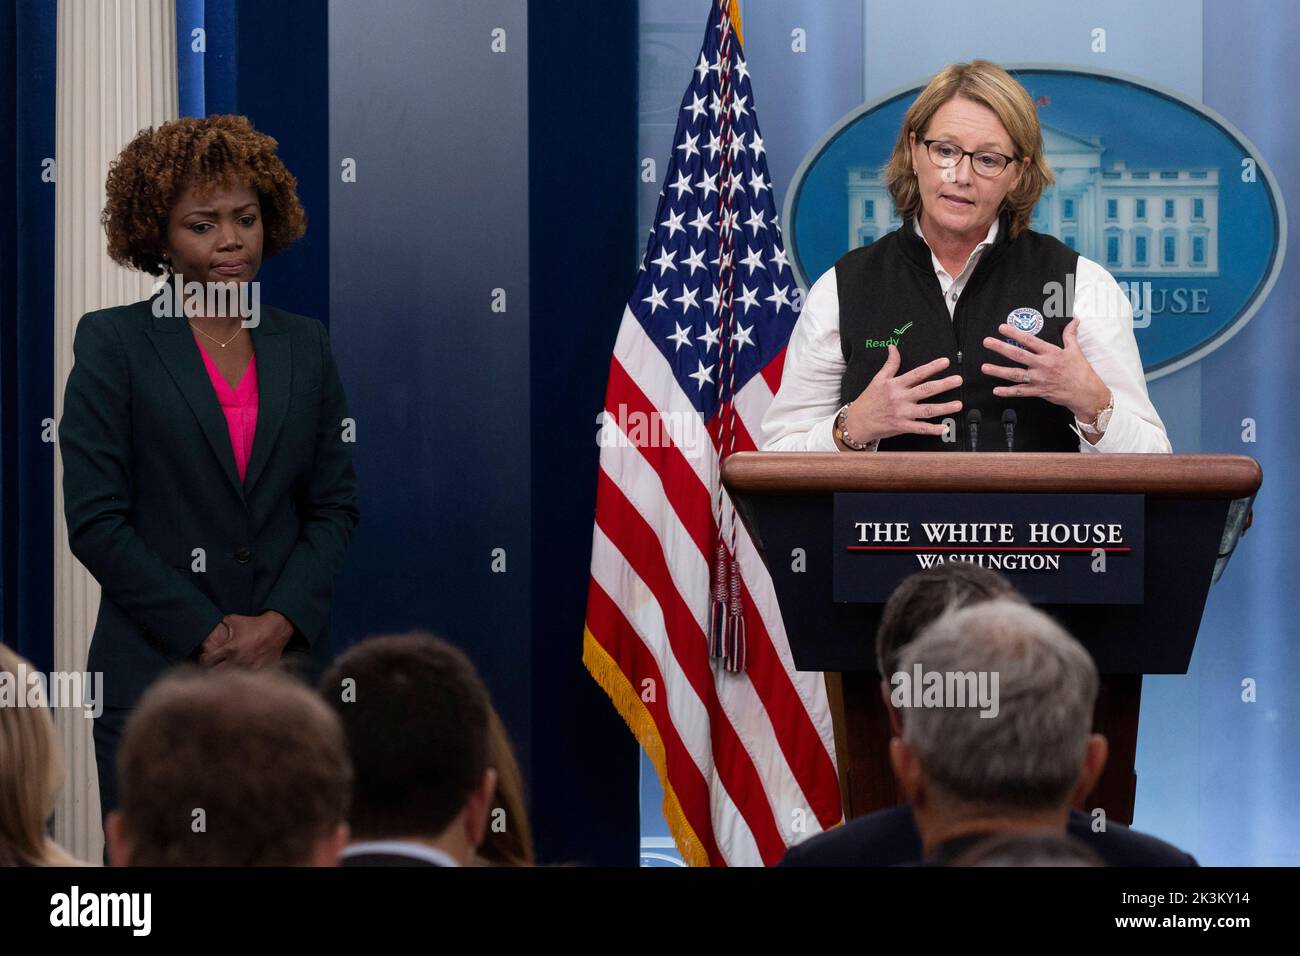 White House Press Secretary Karine Jean-Pierre (L) and Federal Emergency Management Agency (FEMA) Administrator Deanne Criswell (R) participate in a news conference in the James Brady Press Briefing Room of the White House in Washington, DC, USA, 27 September 2022. FEMA Administrator Deanne Criswell discussed preparations for Hurricane Ian, which is currently a category 3 storm. Stock Photo